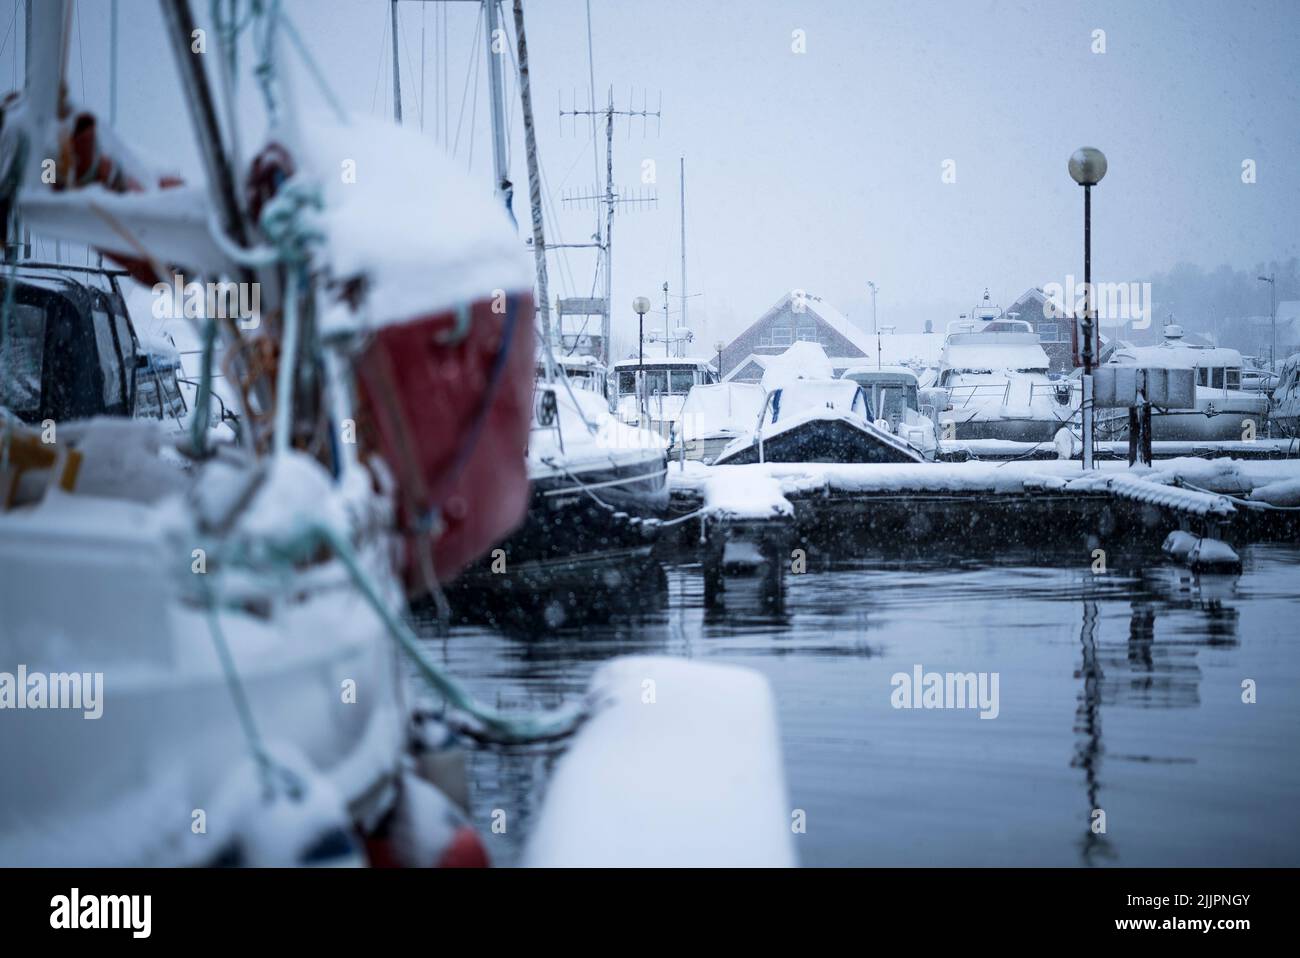 A harbor in Tromsdalen, Norway with boats in winter Stock Photo